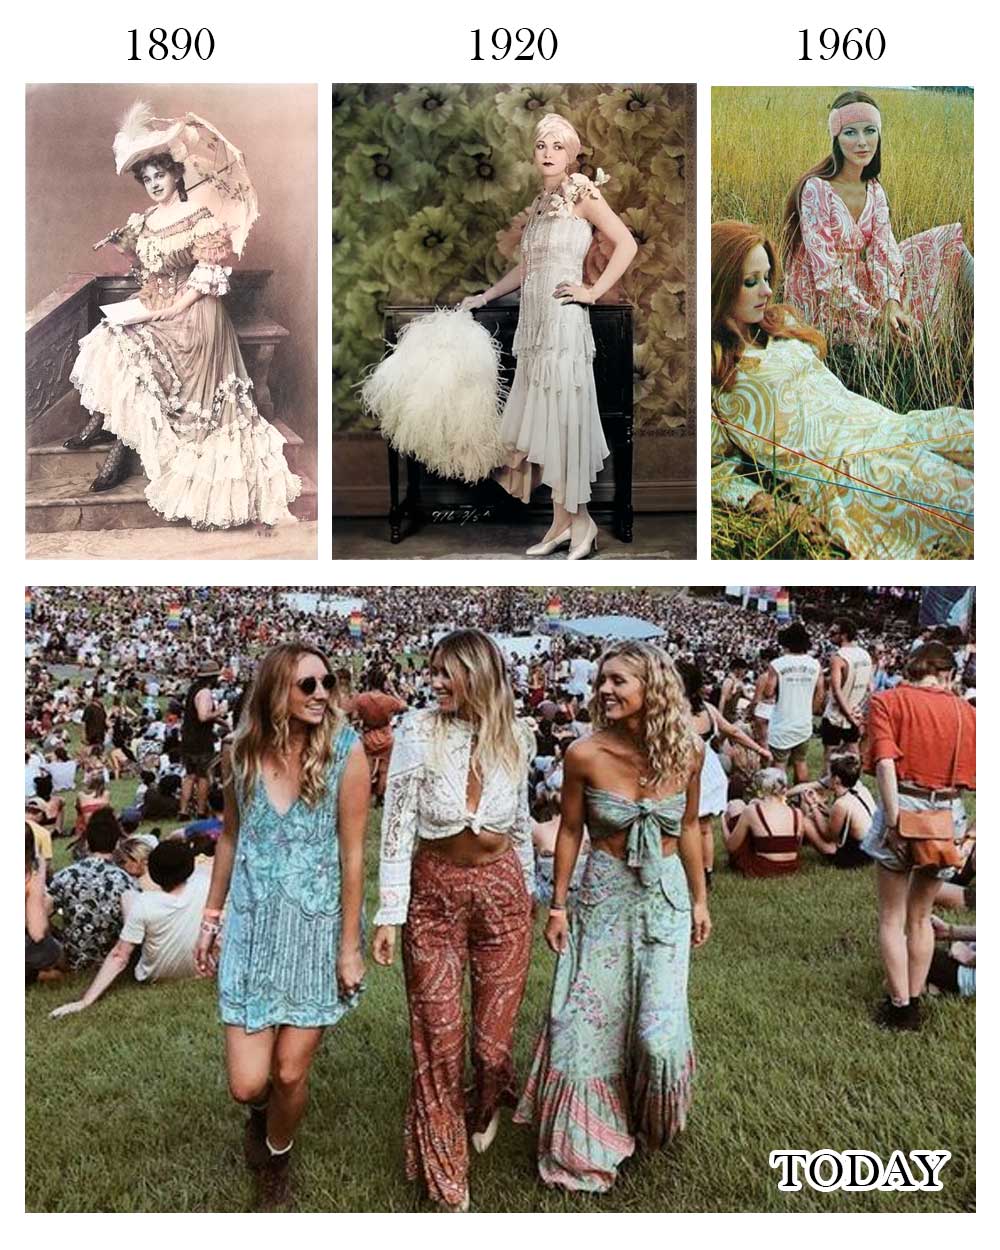 boho fashion evolution from 1890 to the present day